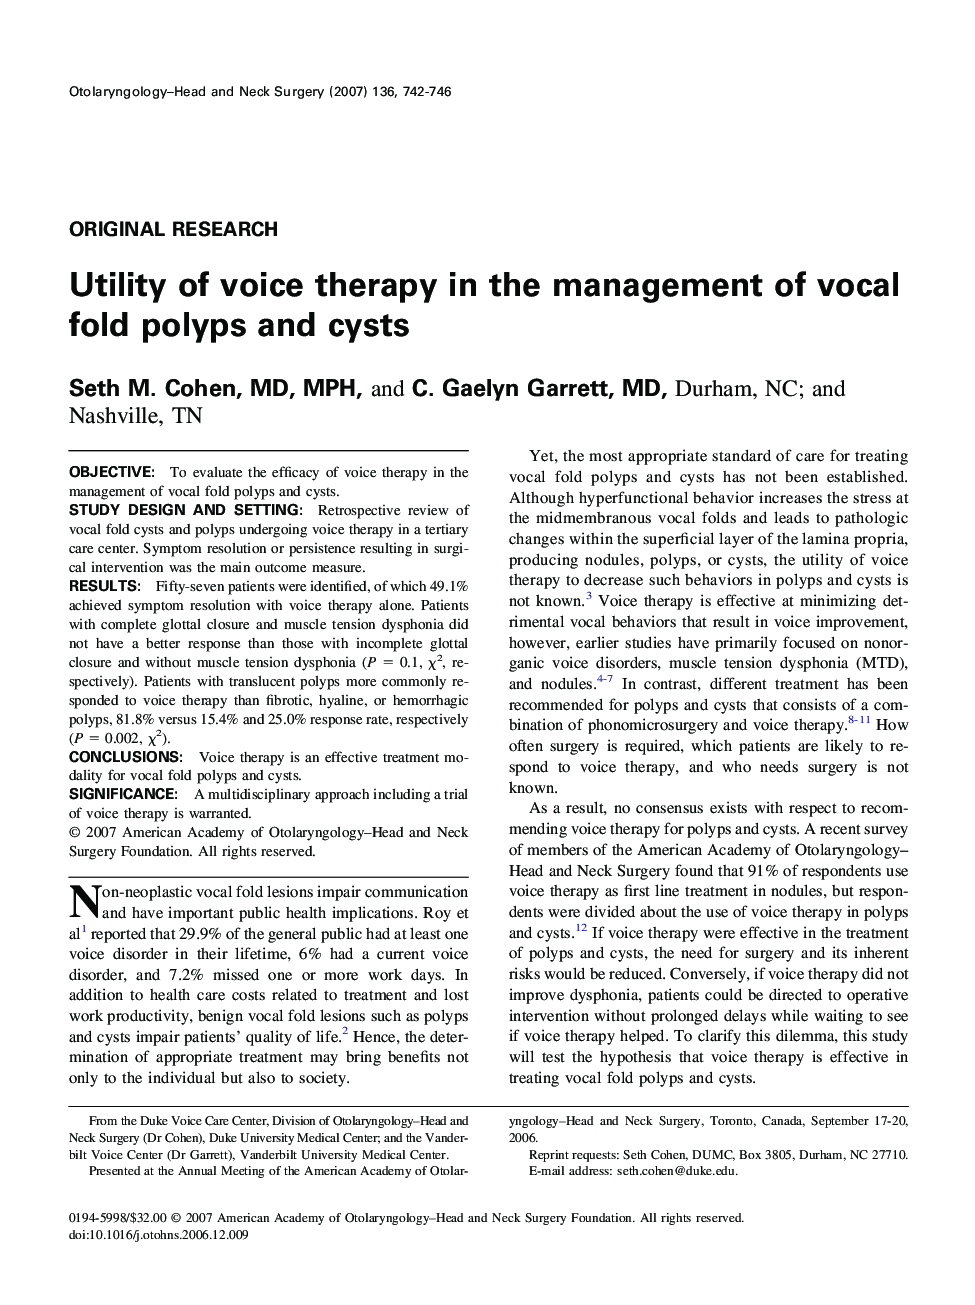 Utility of voice therapy in the management of vocal fold polyps and cysts